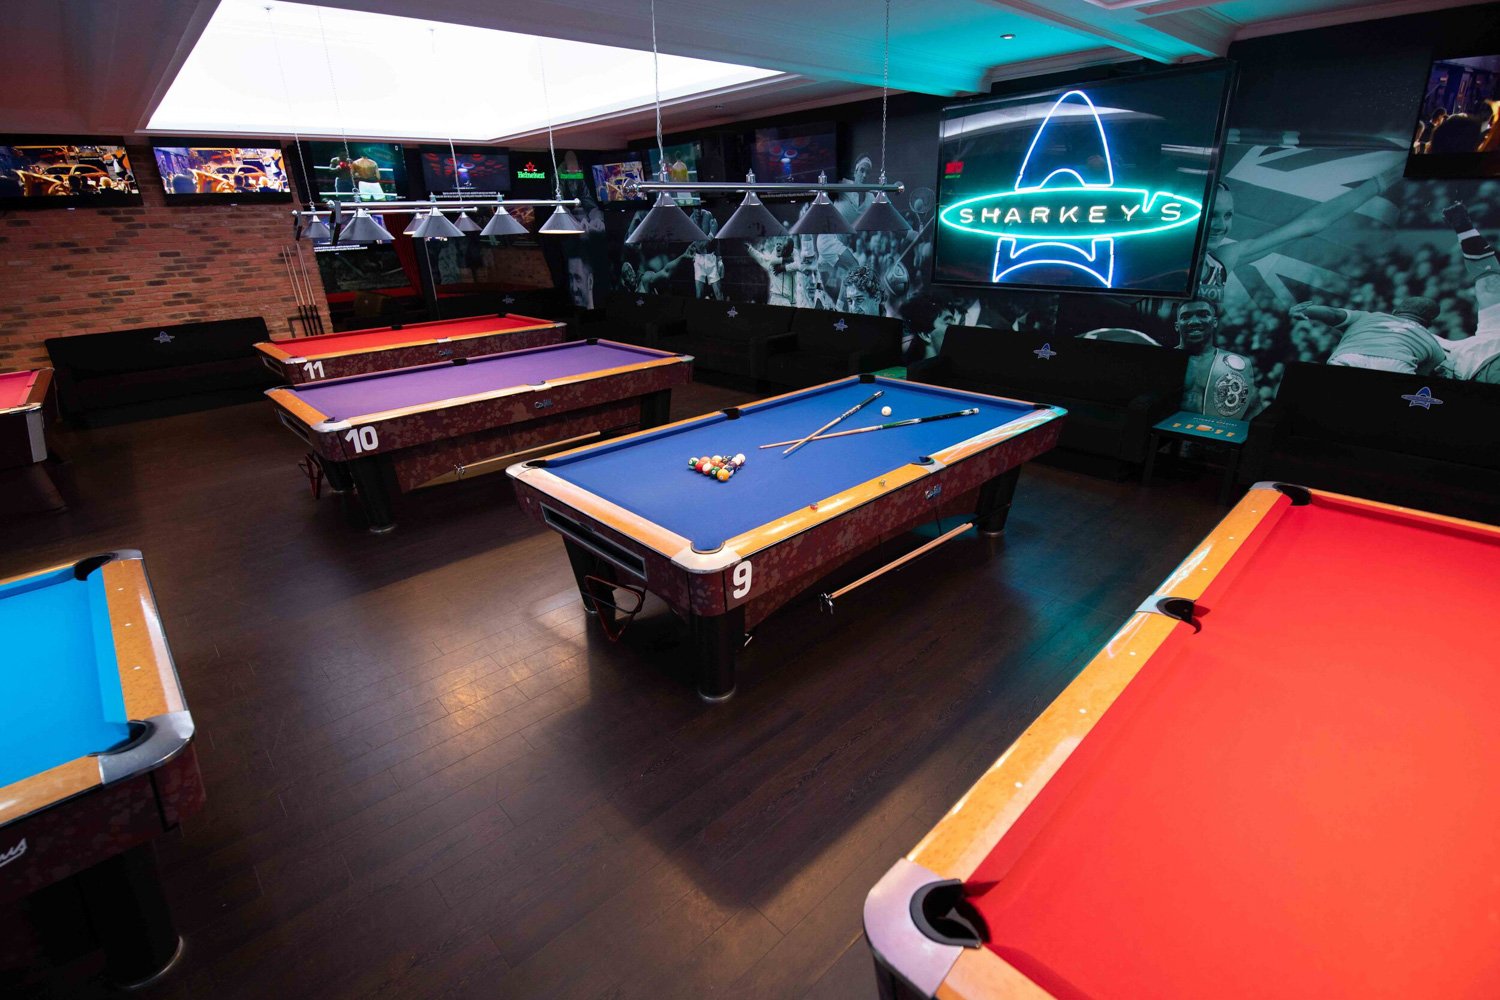 Sharkeys_Sports_Bar_Bournemouth_Live_Sports_Poole_Snooker_Table_Tennis_VIP_Rooms_Consoles-18.jpg